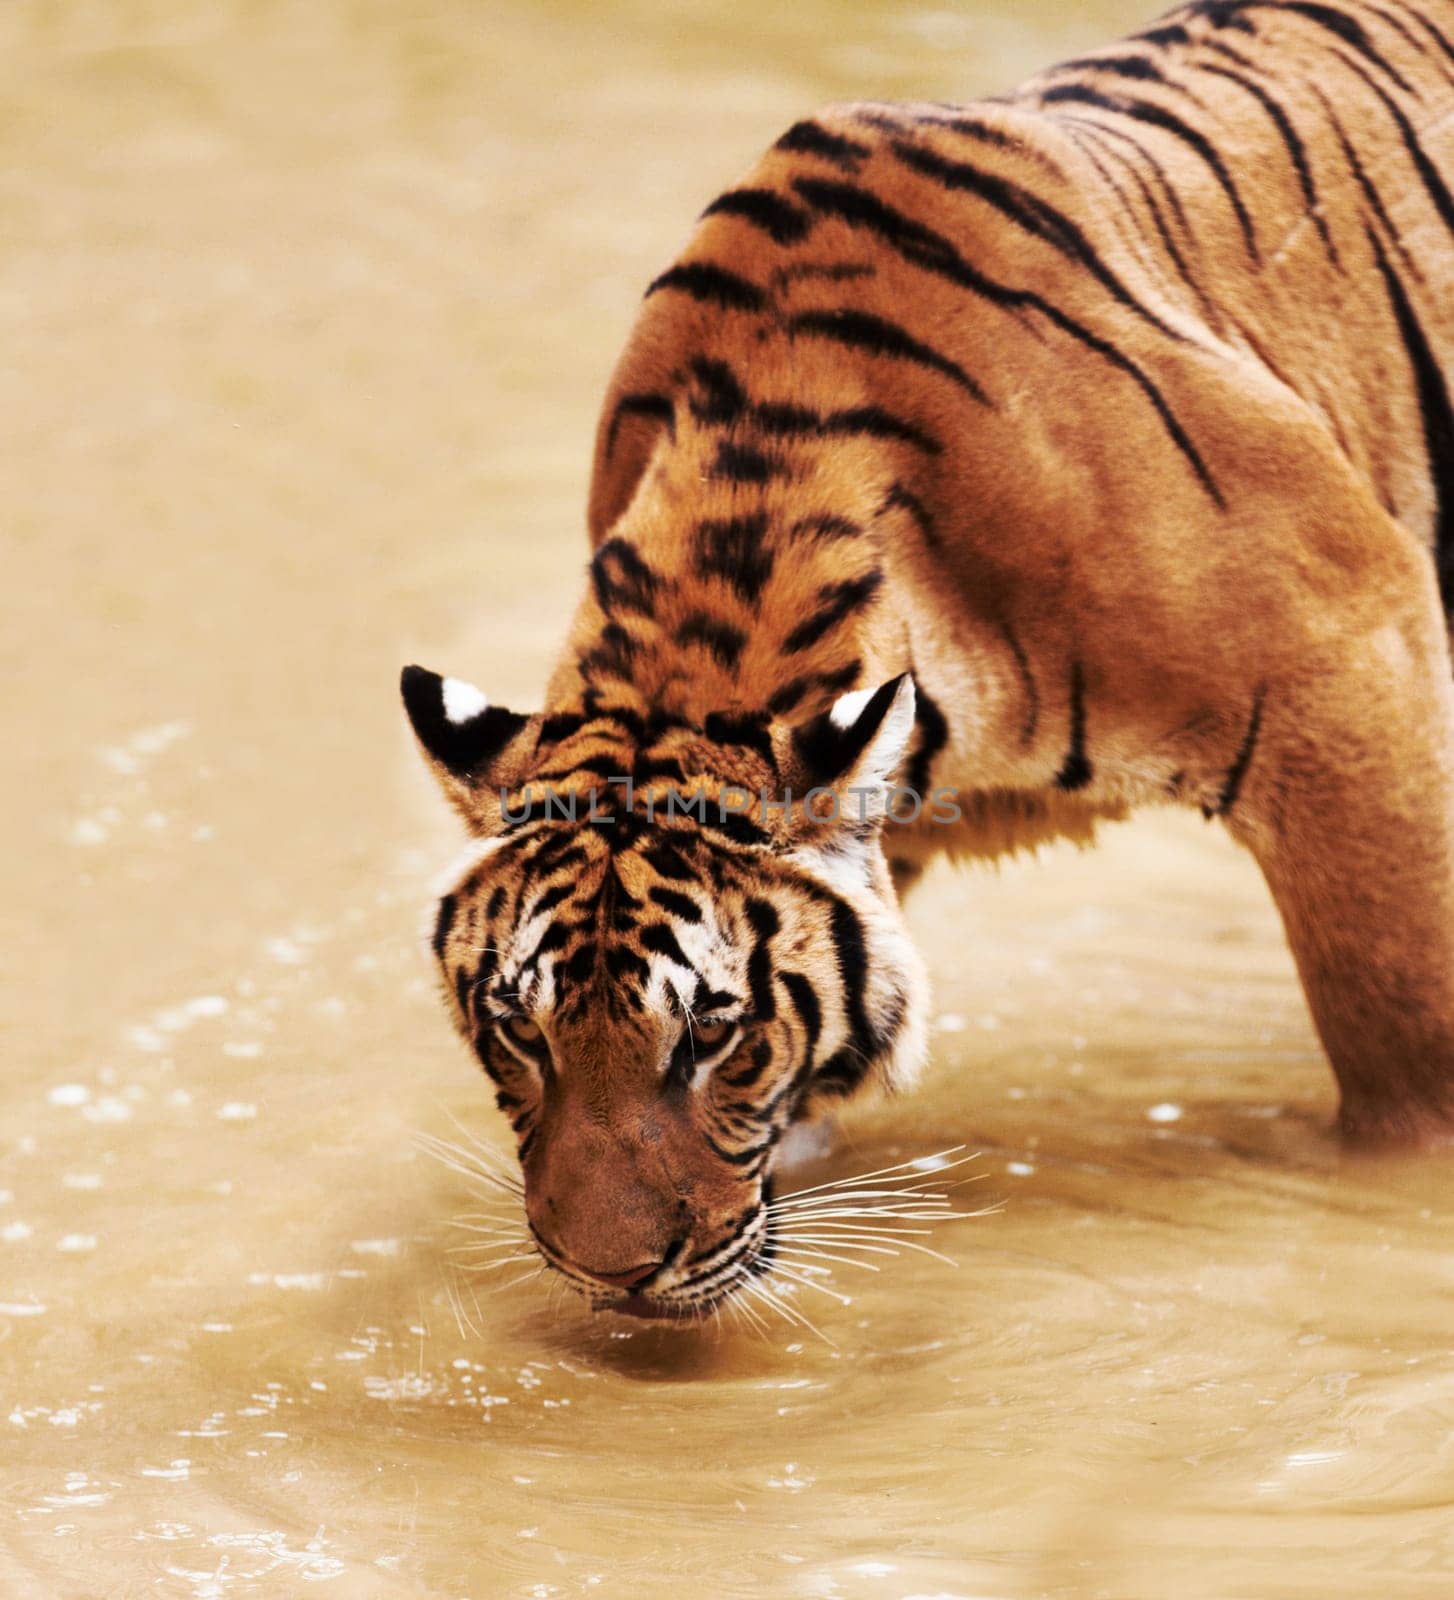 Nature, animals and tiger drinking water in zoo with playful cubs in mud for endangered wildlife. Jungle, strong cat park, river or dam in Thailand for safari, outdoor danger and predator with power by YuriArcurs